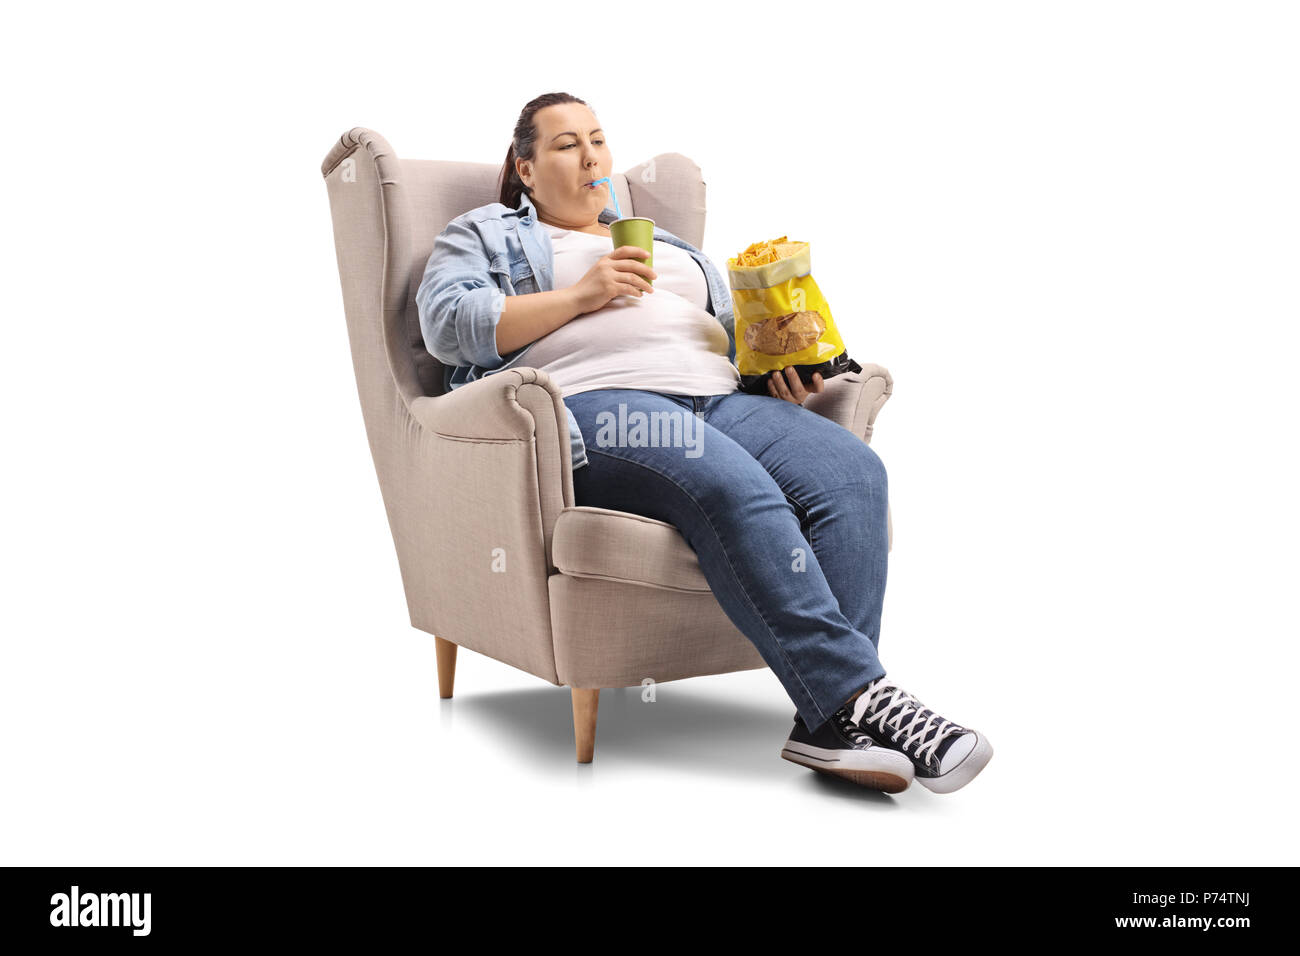 Overweight woman with a drink and a bag of chips sitting in an armchair isolated on white background Stock Photo